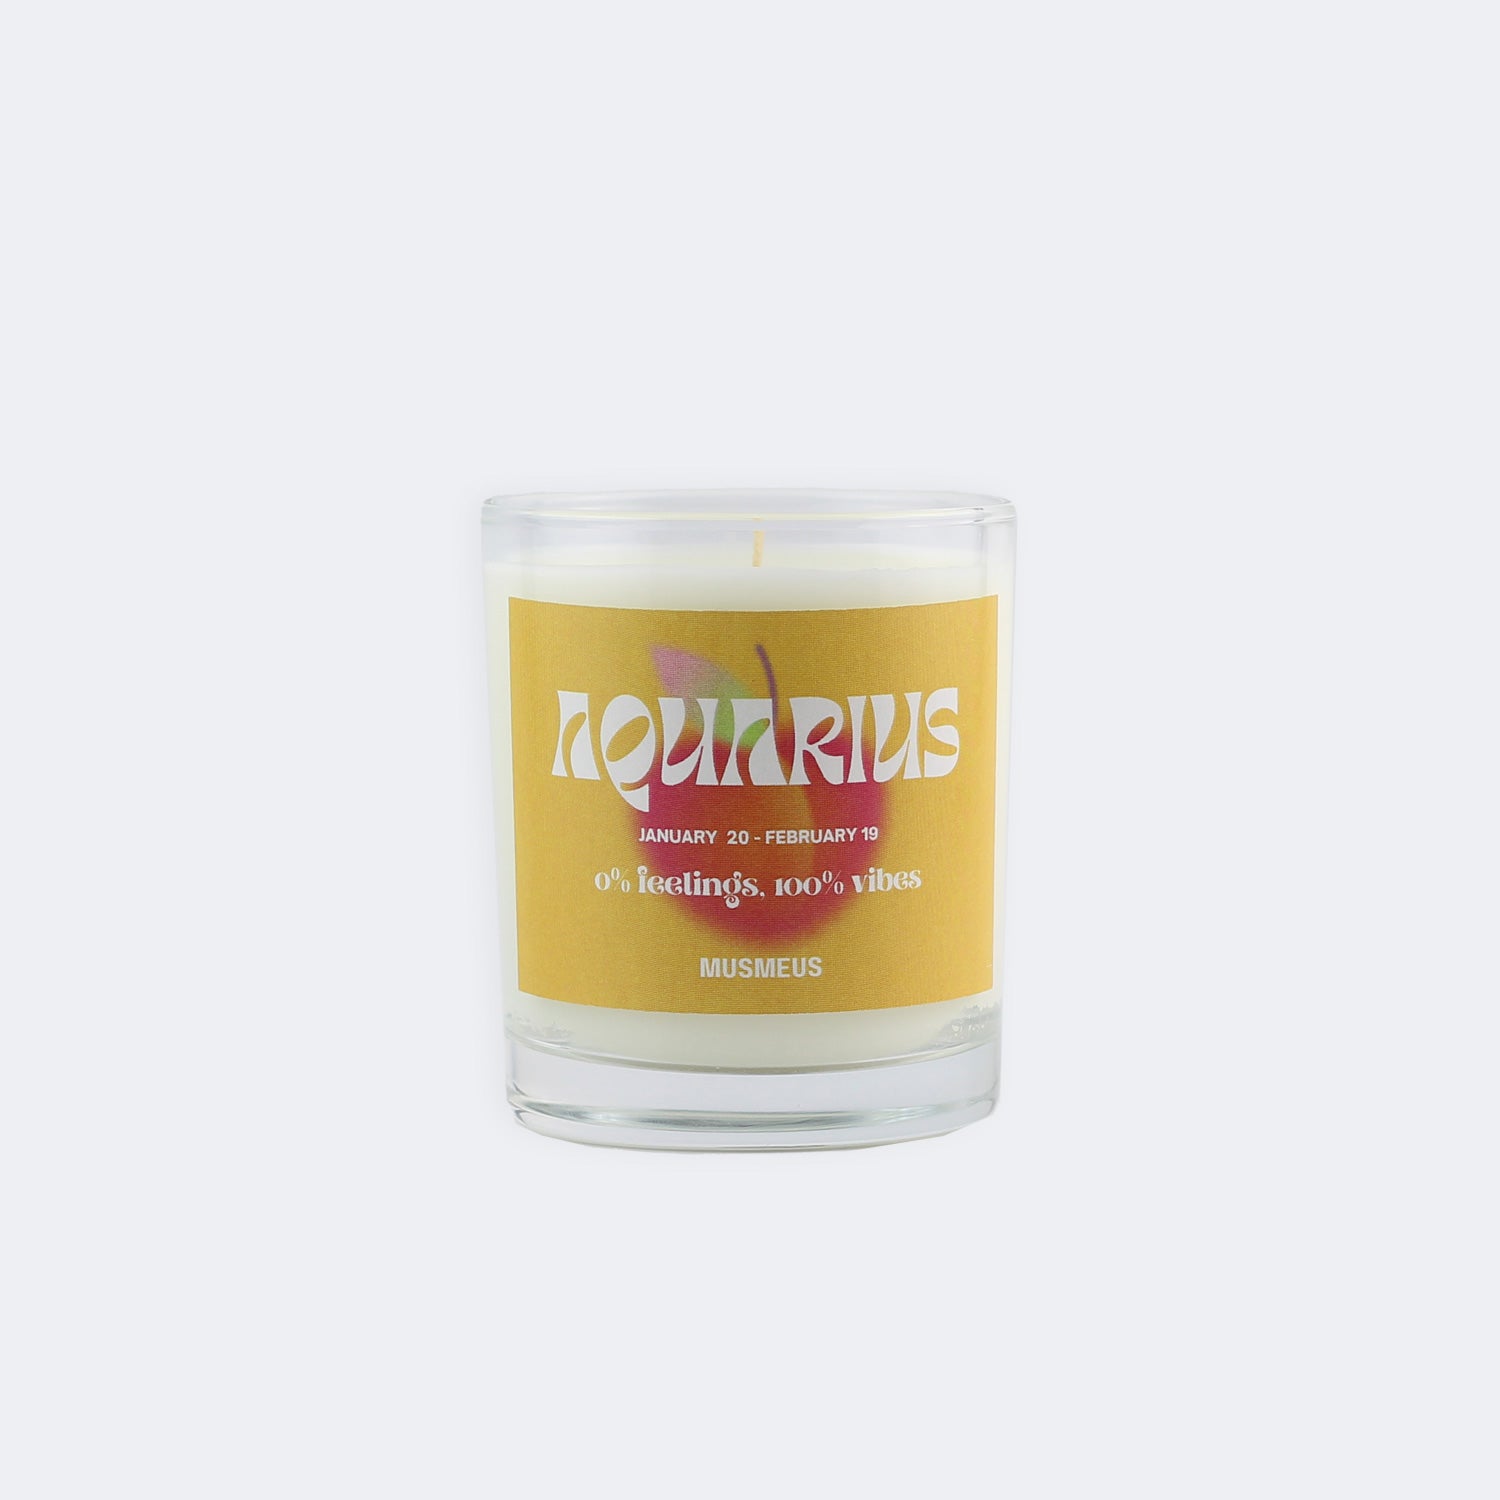 Aquarius Soy Wax Scented Candle